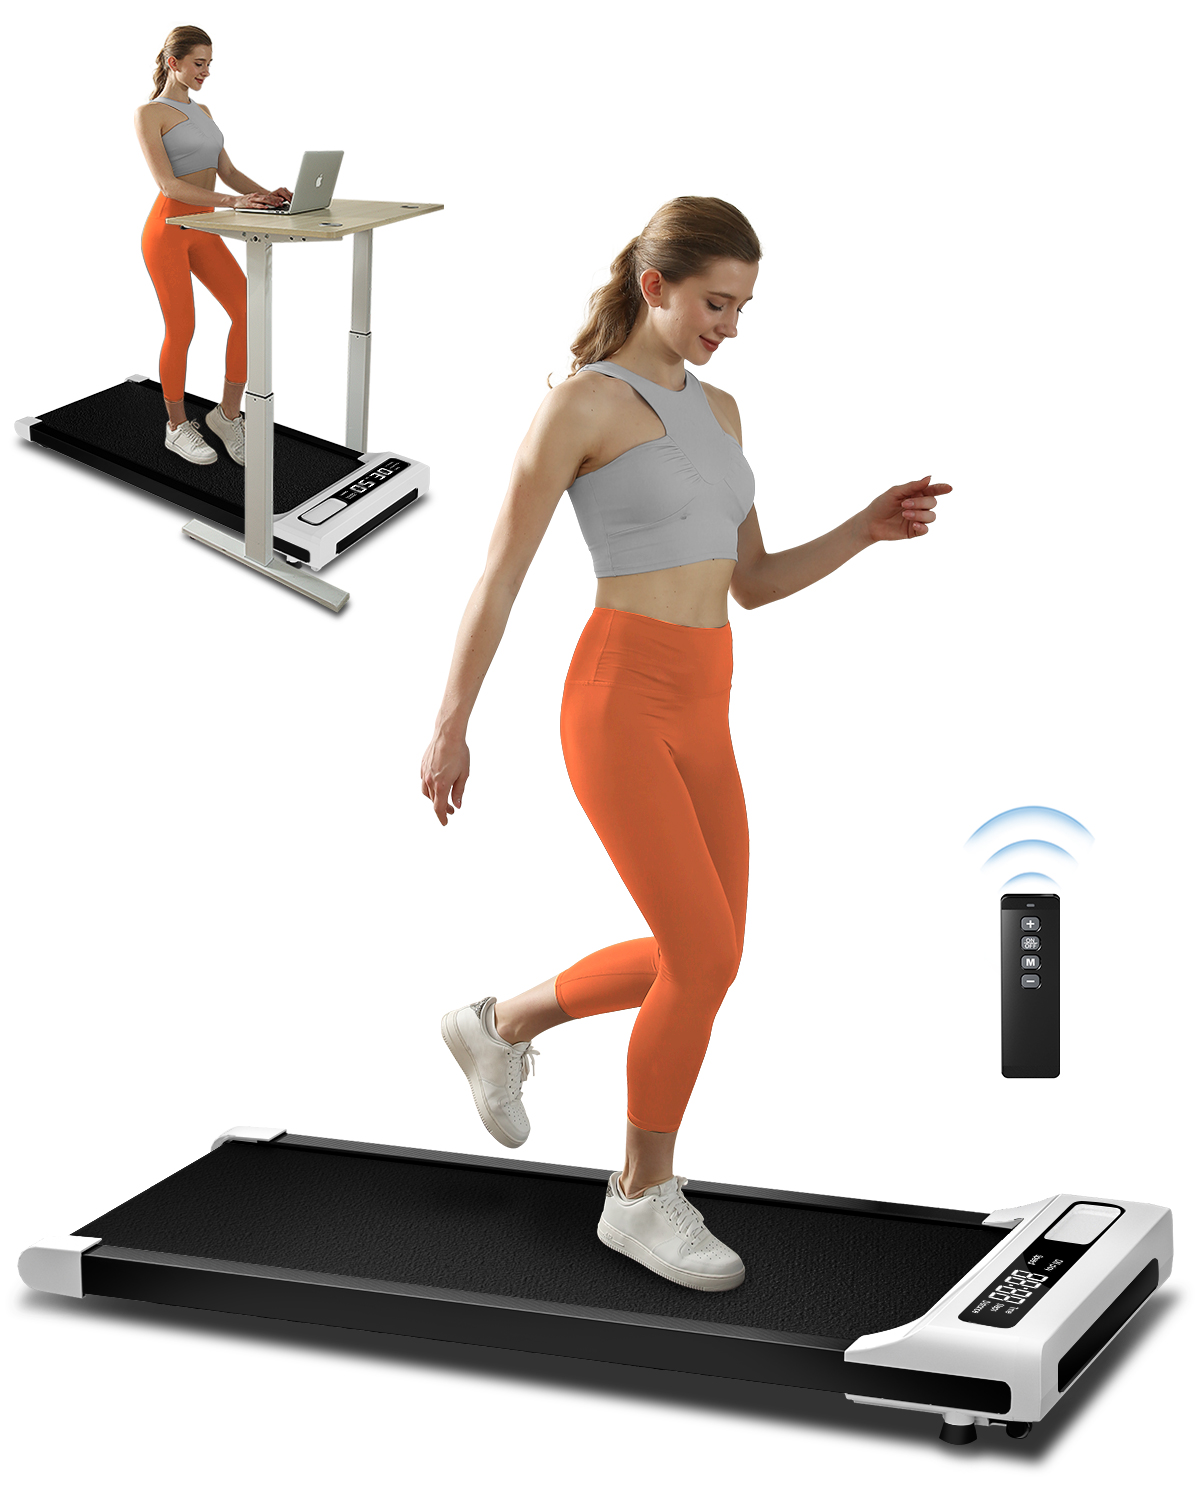 JURITS Walking Pad 2 in 1 for Walking and Jogging, Under Desk Treadmill for Home Office with Remote Control, Portable Walking Pad Treadmill Under Desk, Desk Treadmill in LED Display,White - image 1 of 6